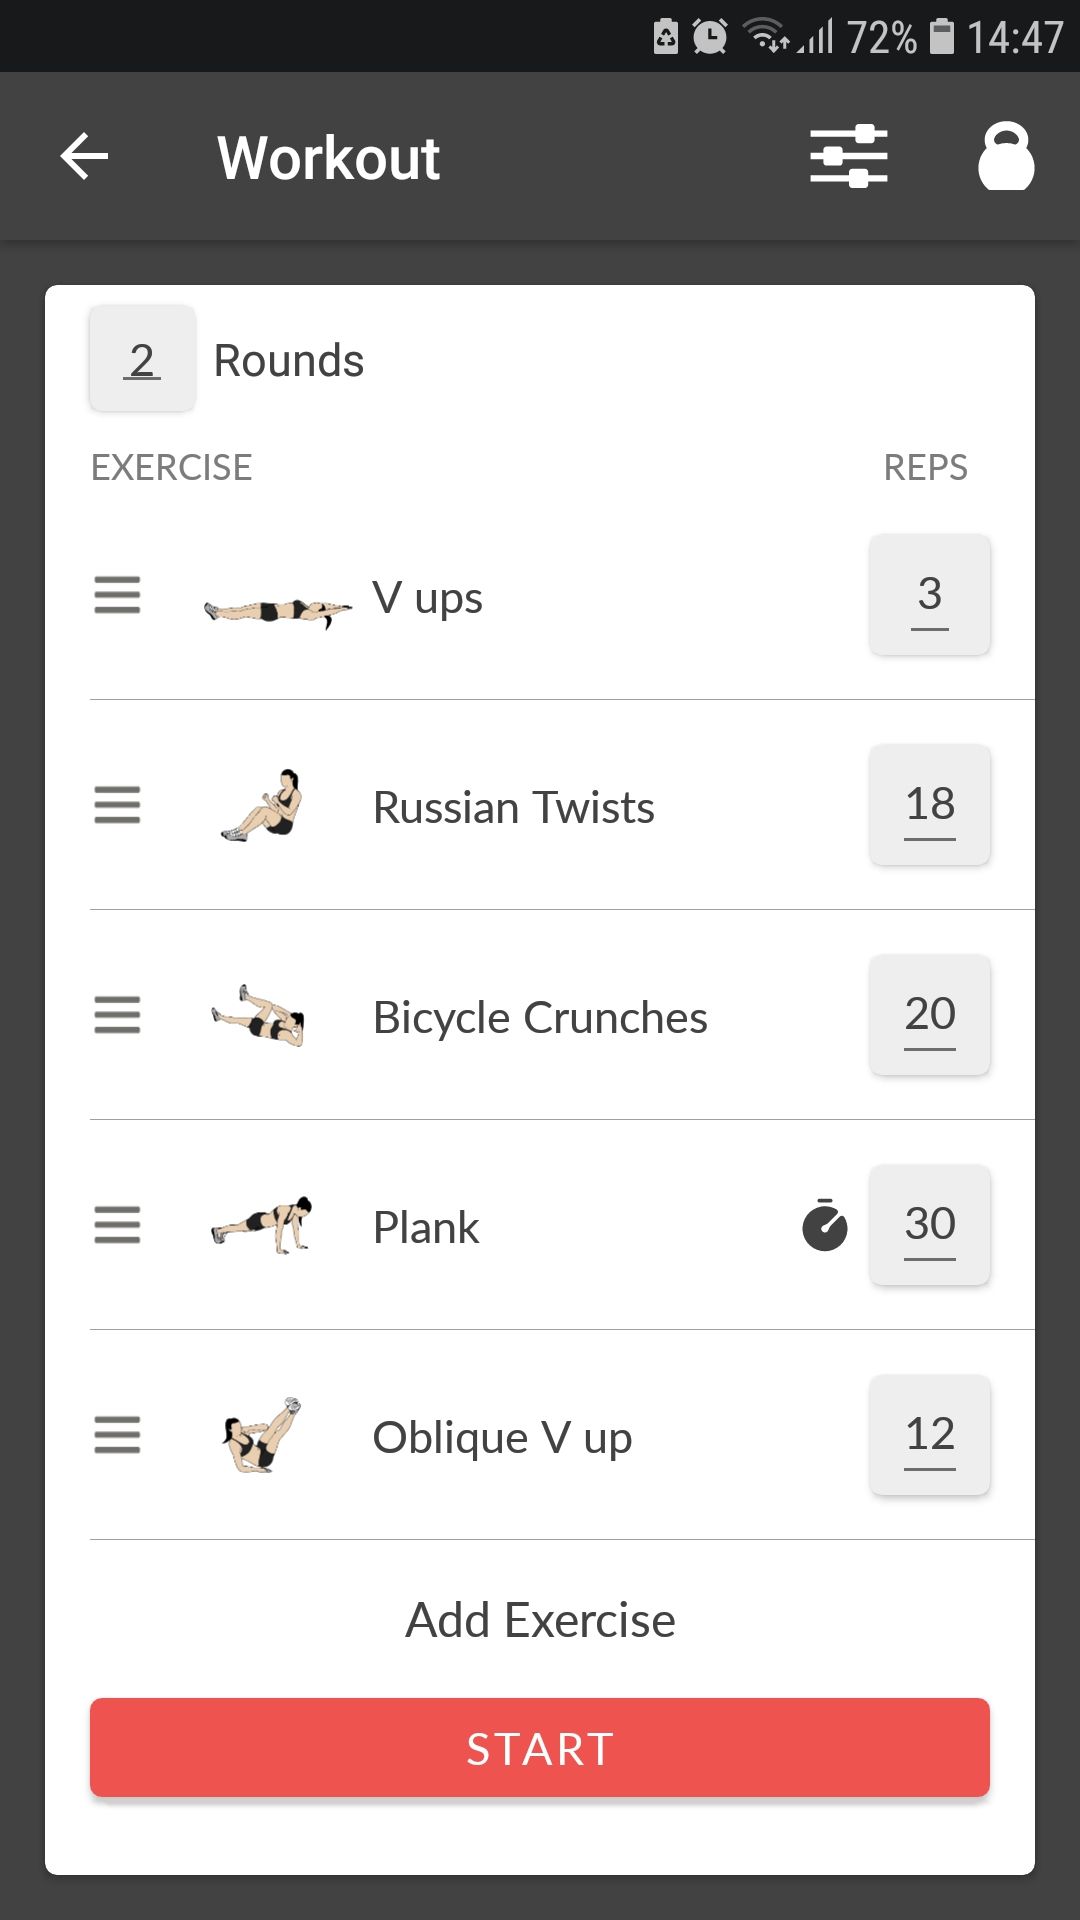 HIIT Workout Generator mobile fitness app exercises